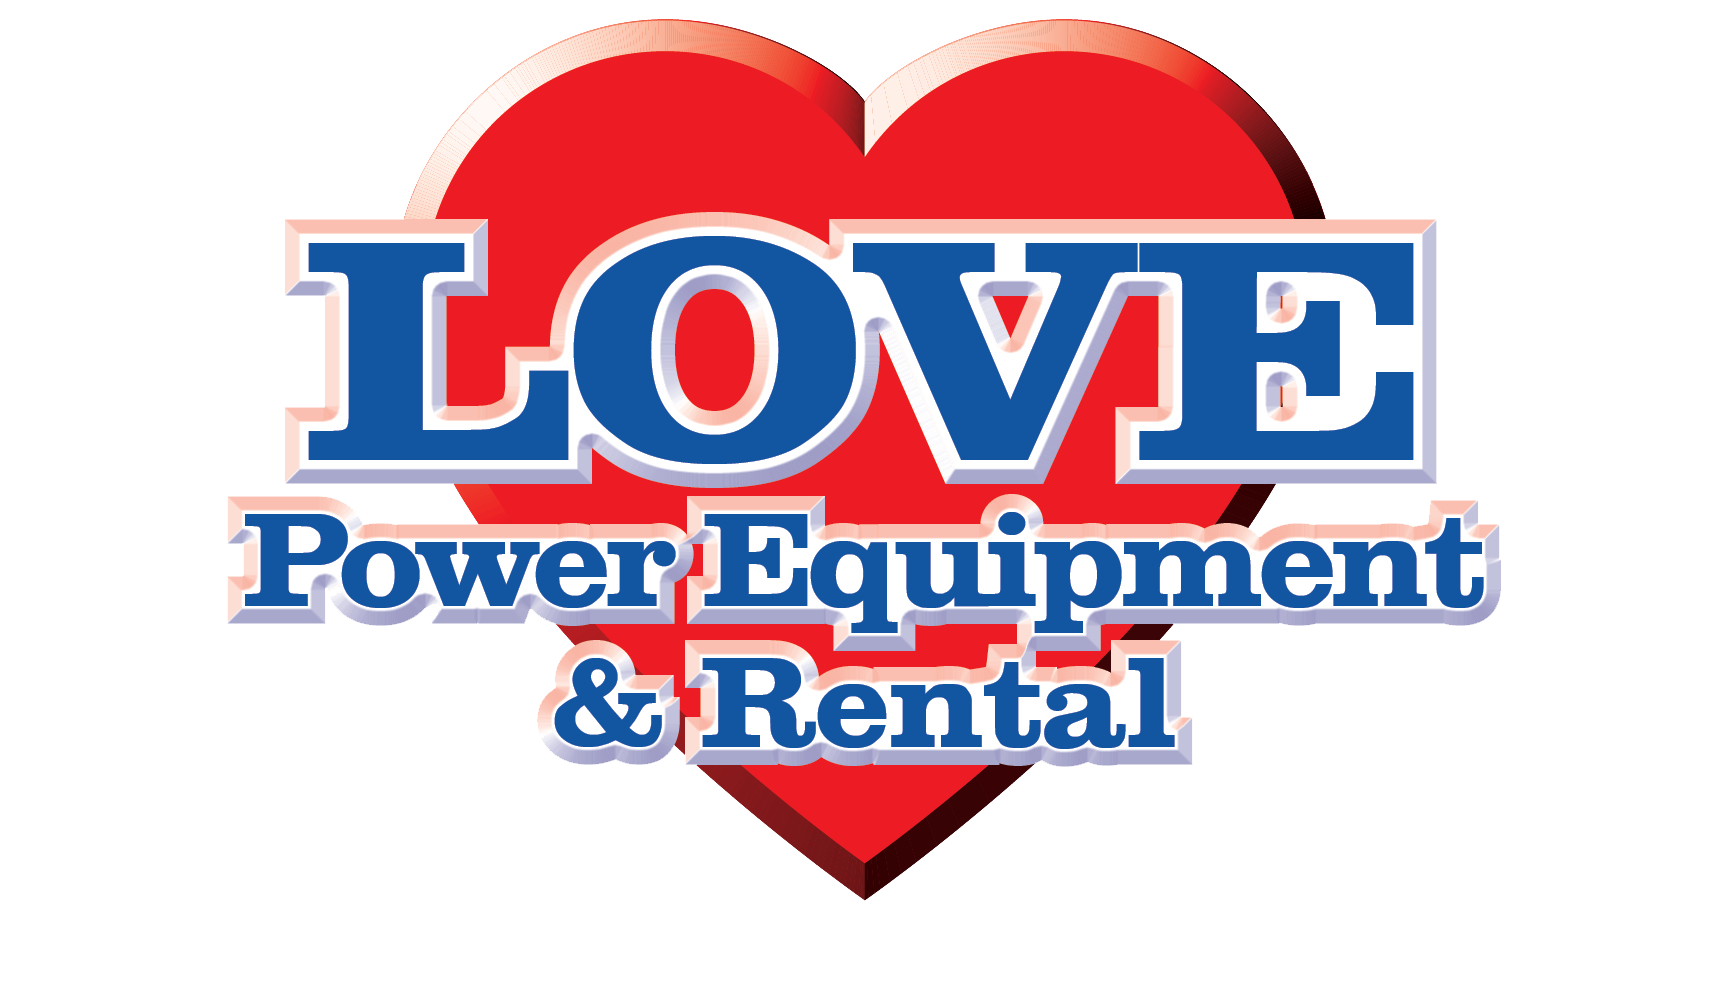 Love Power Equipment and Rentals proudly serves Chiefland, FL and our neighbors in Gainesville, Lake City, Perry and Ocala